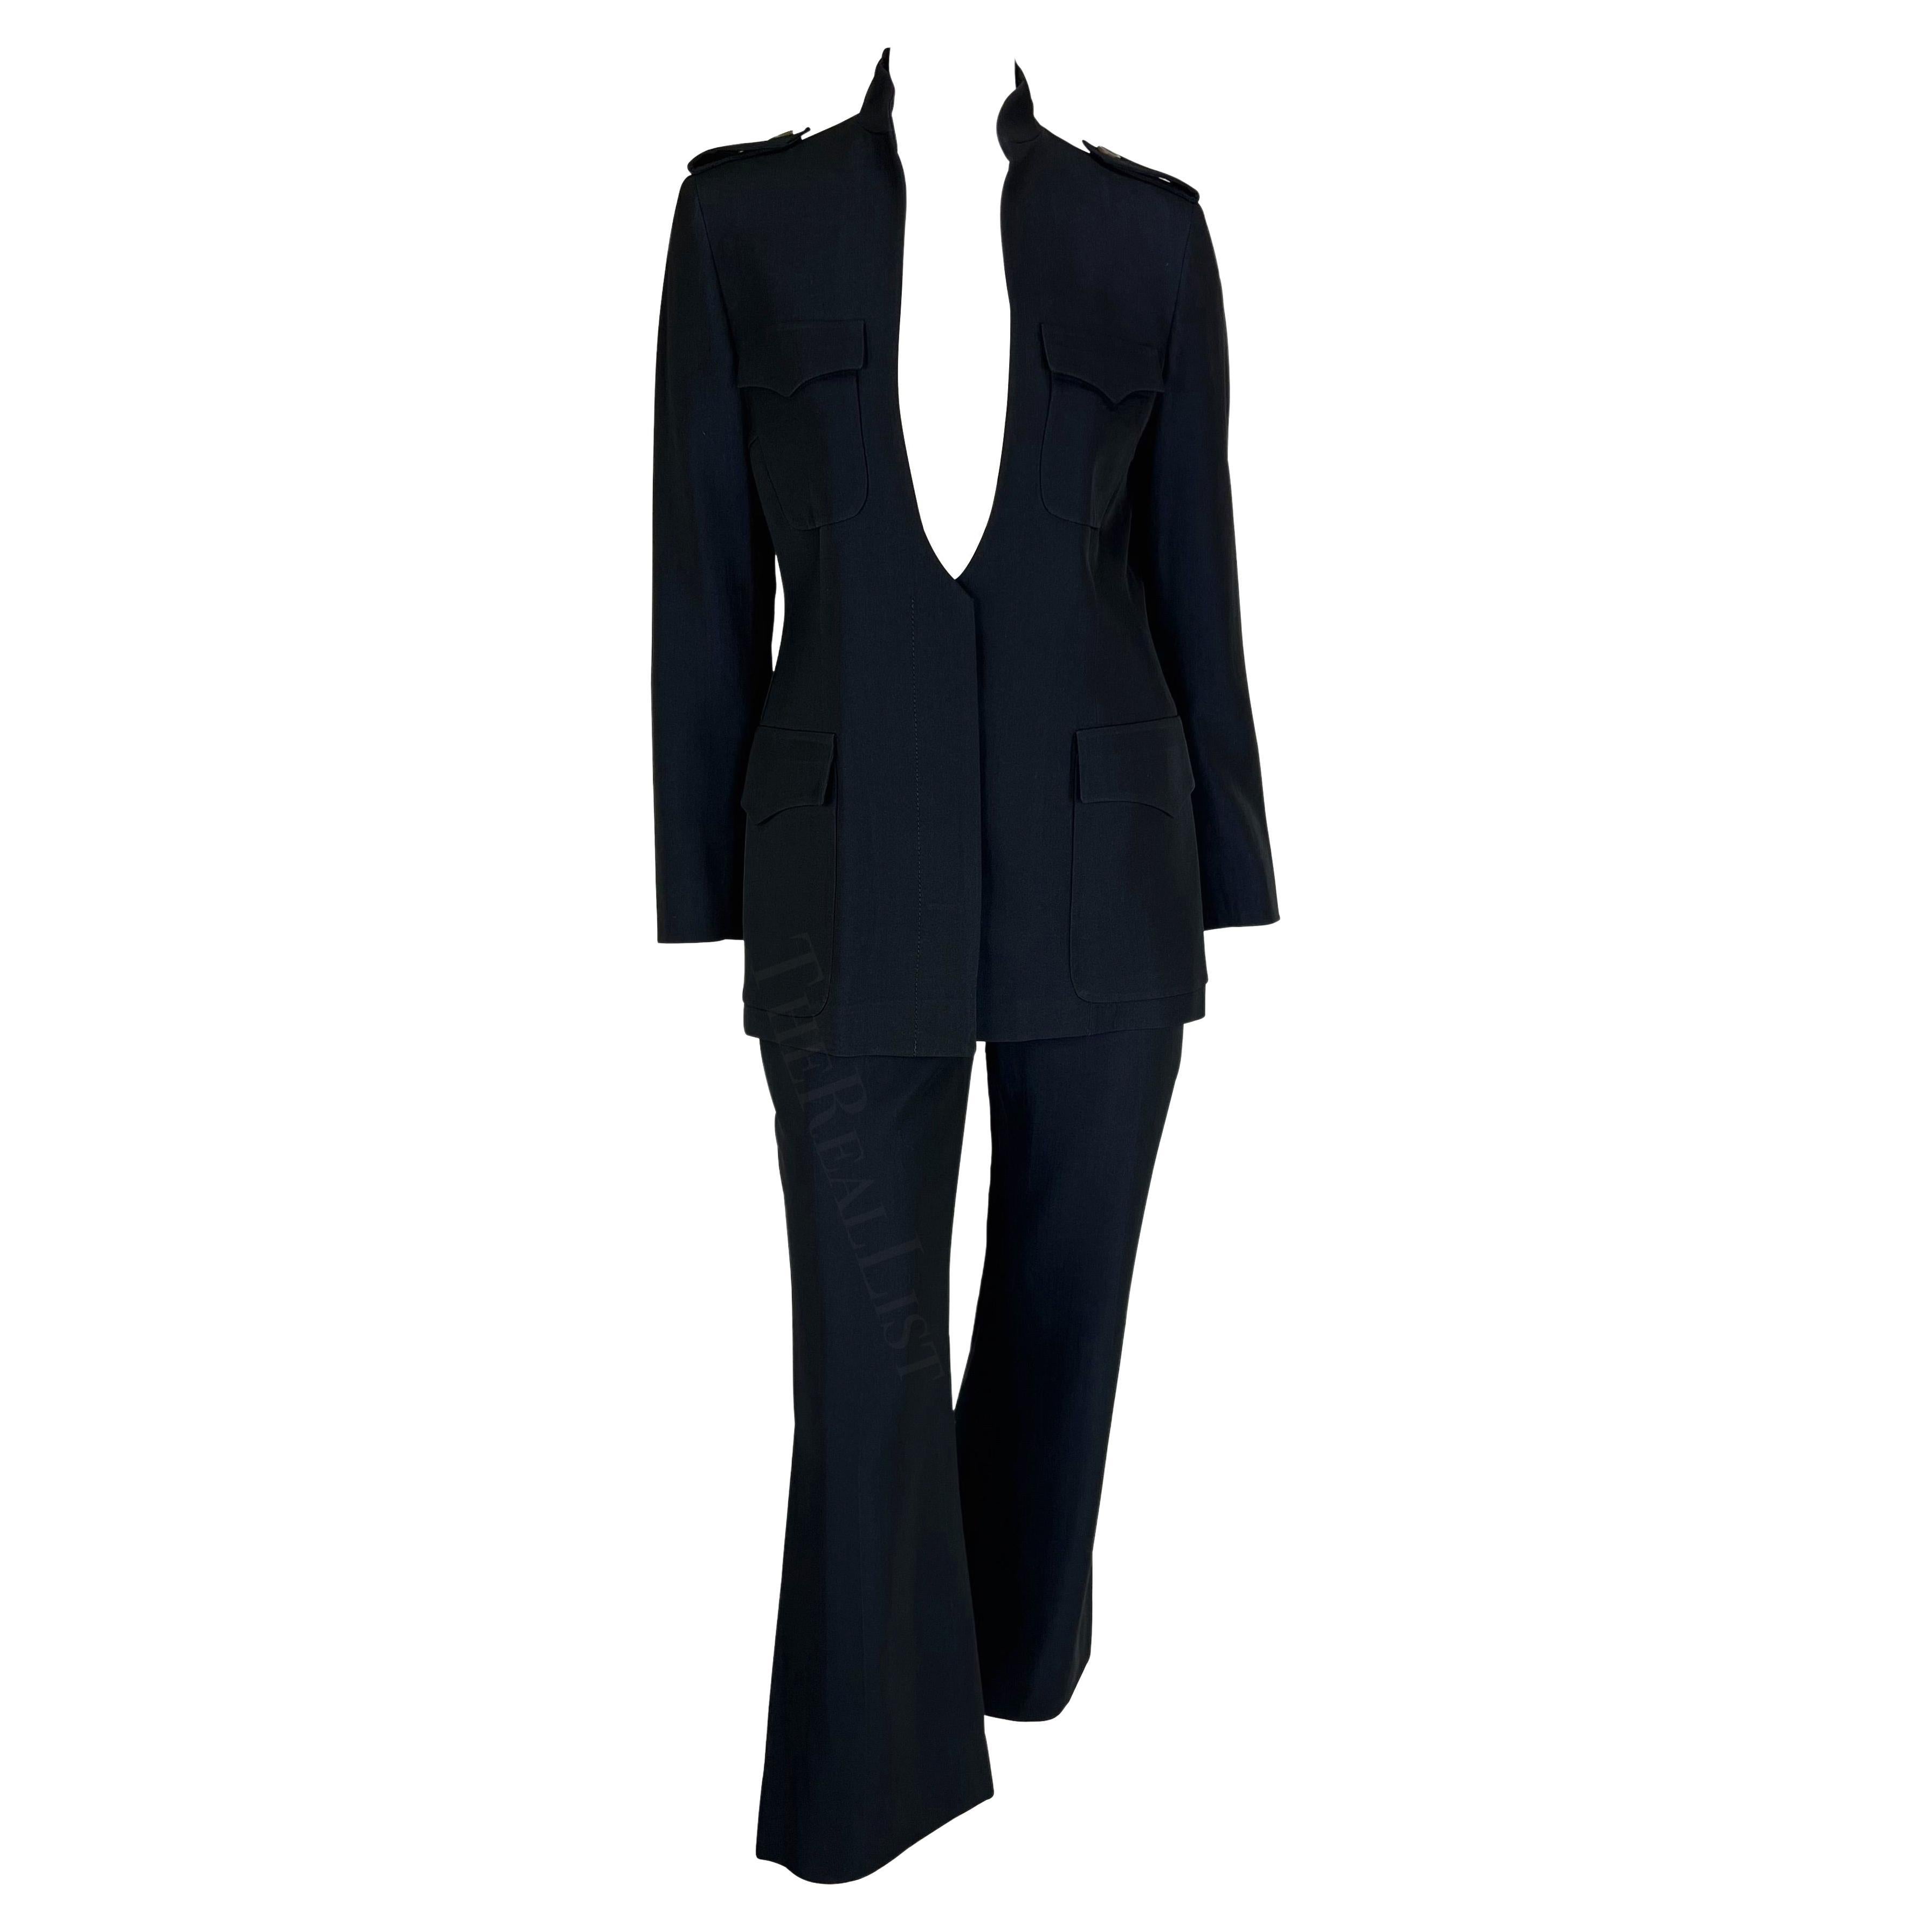 F/W 1996 Gucci by Tom Ford Runway Plunging Iridescent Navy Pantsuit For Sale